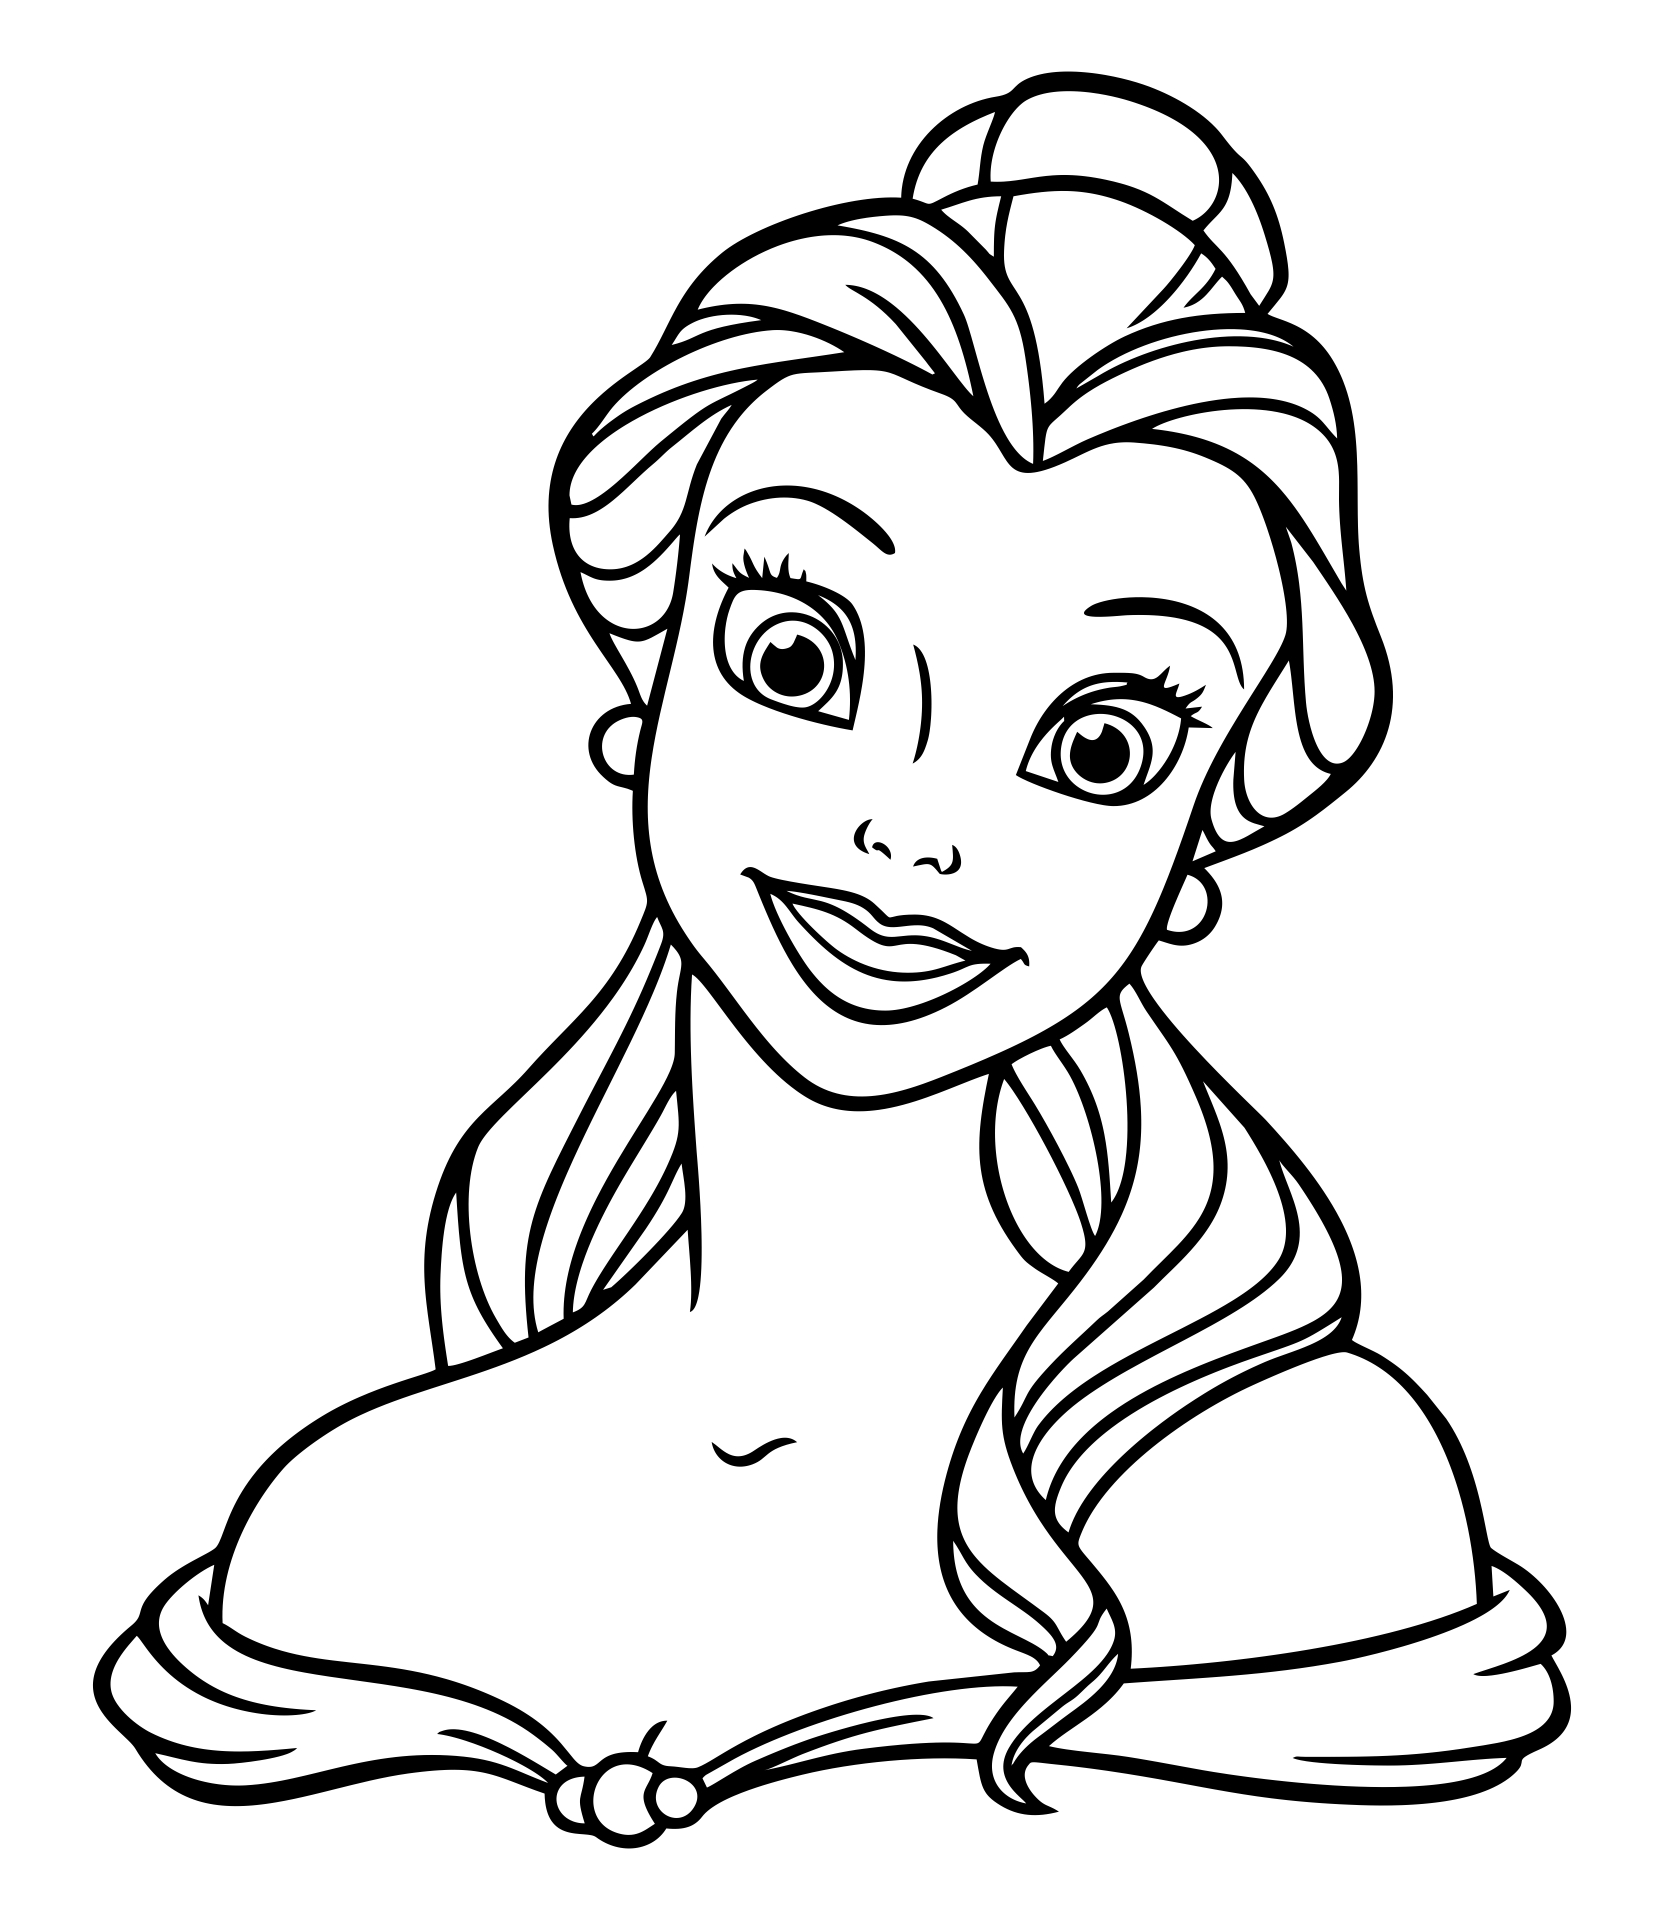 Disney Princess Coloring Pages To Print